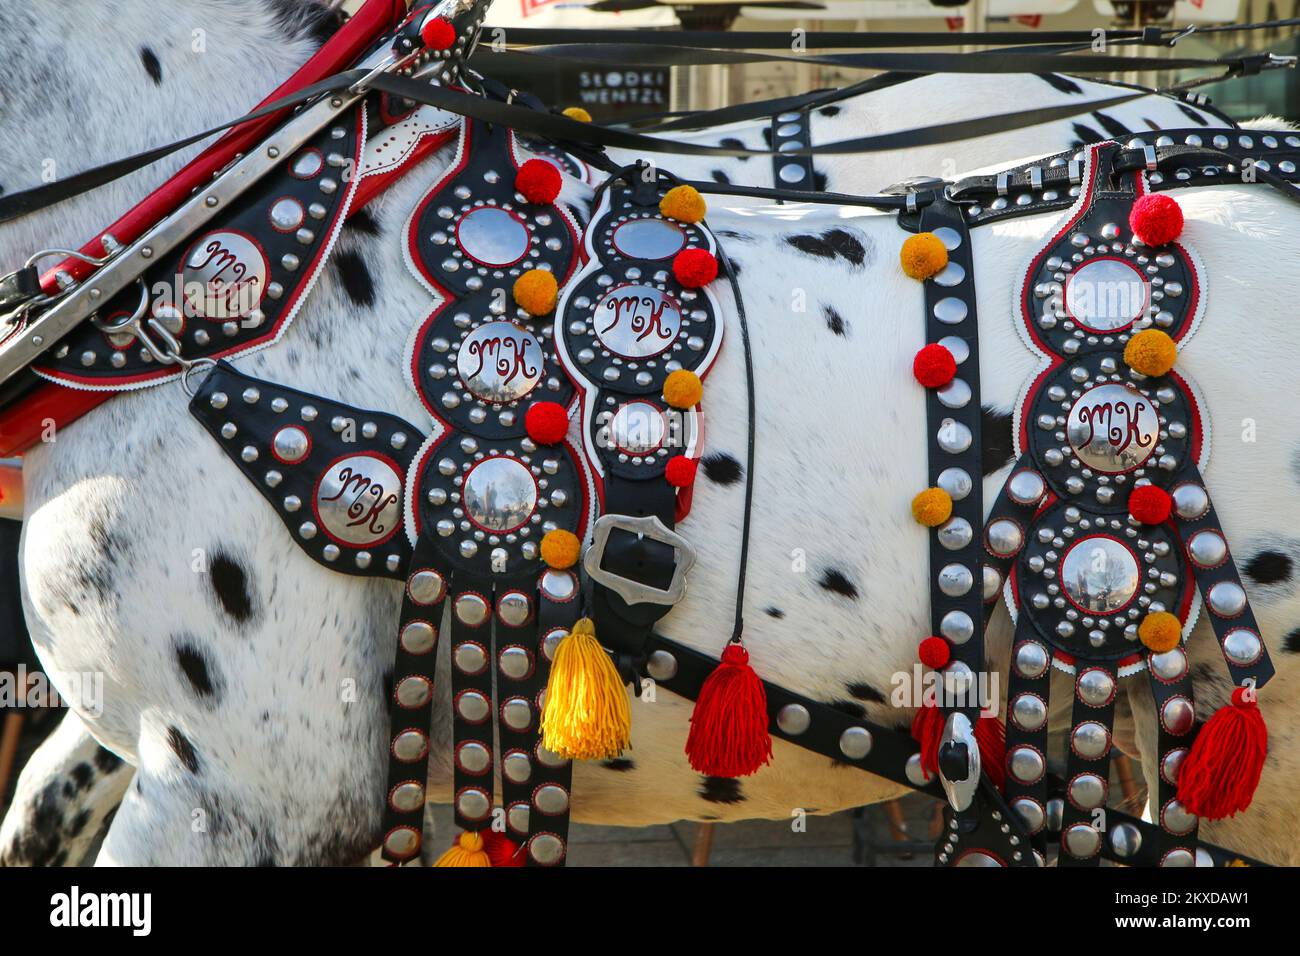 The detail of the decorative traditional horse harness. Stock Photo